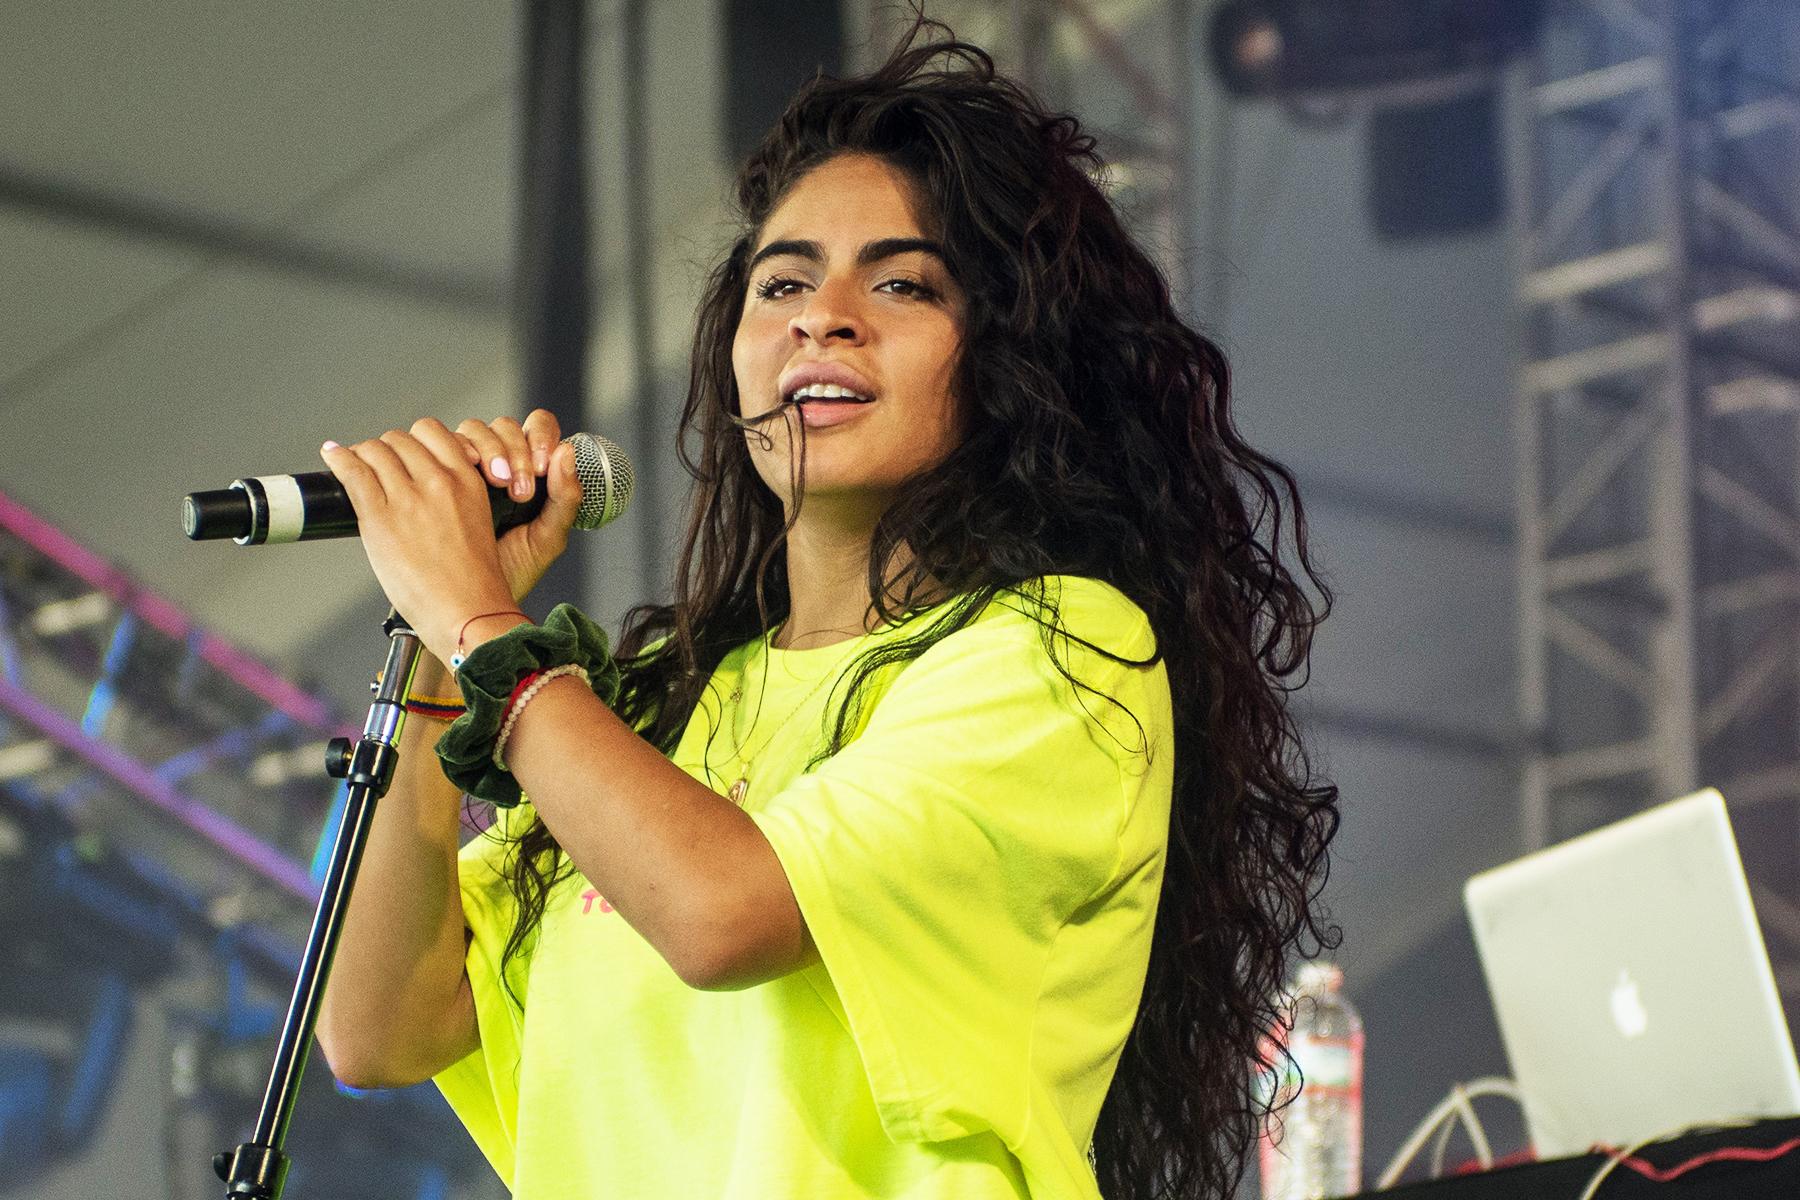 51 Hot Pictures Of Jessie Reyez Will Leave You Flabbergasted By Her Hot Magnificence 520